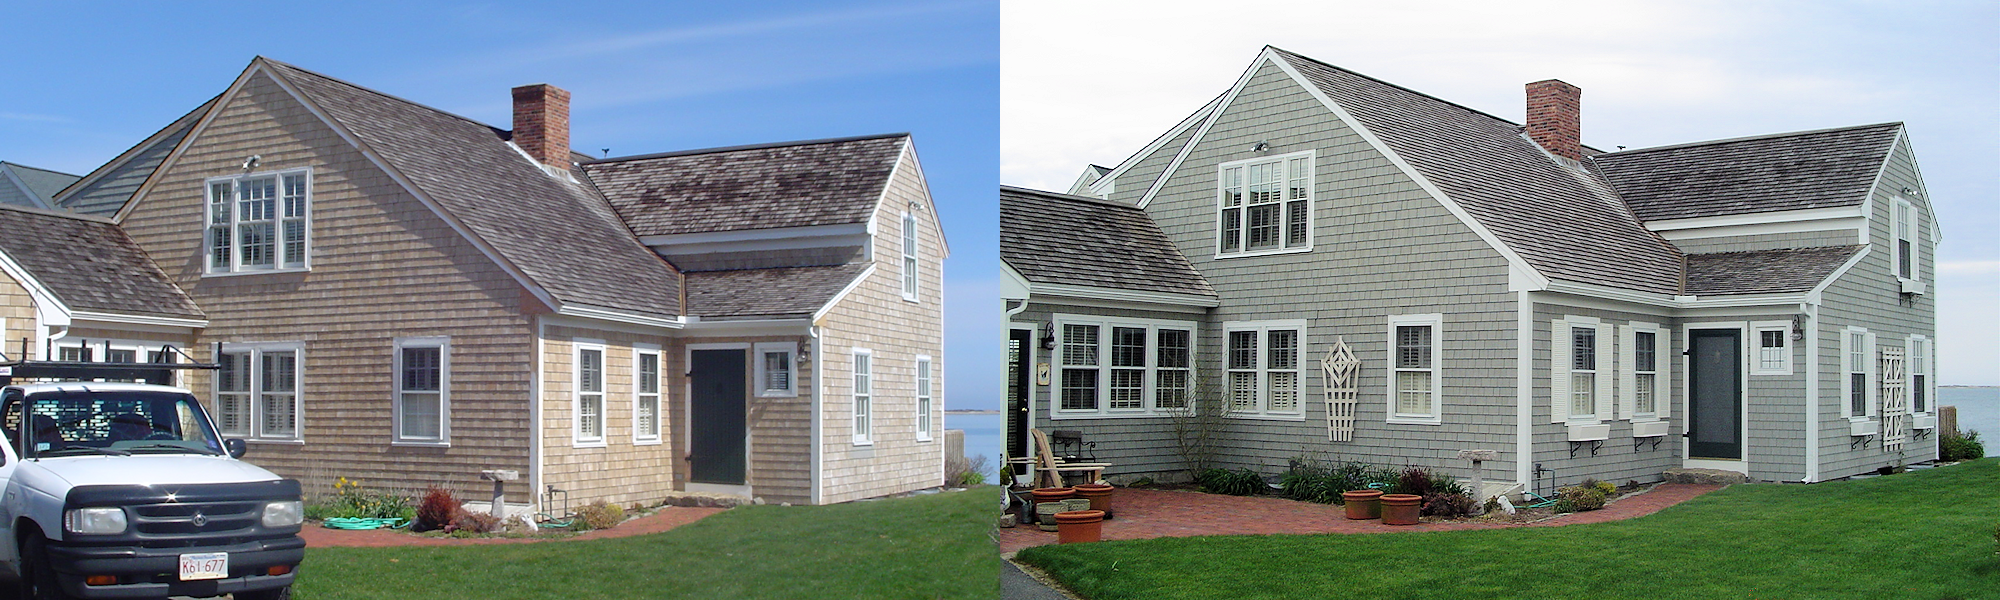 Exterior House Painting before and After